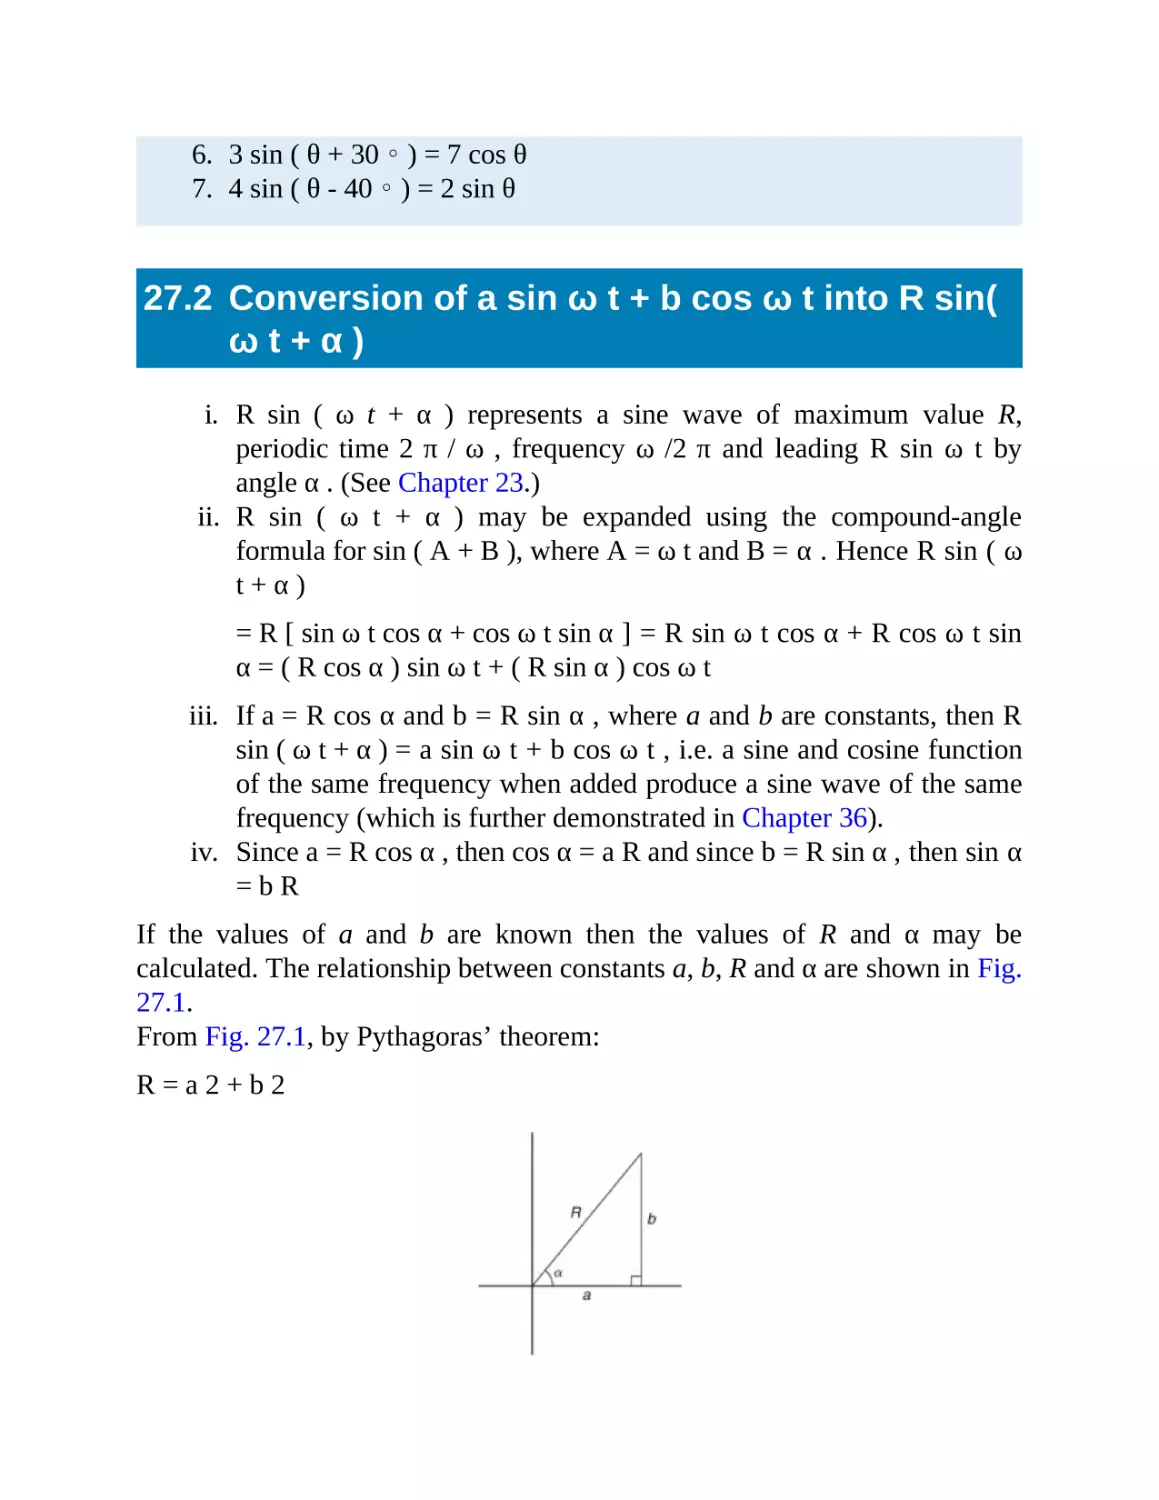 27.2 Conversion of a sin t b cos t into R sin( t )